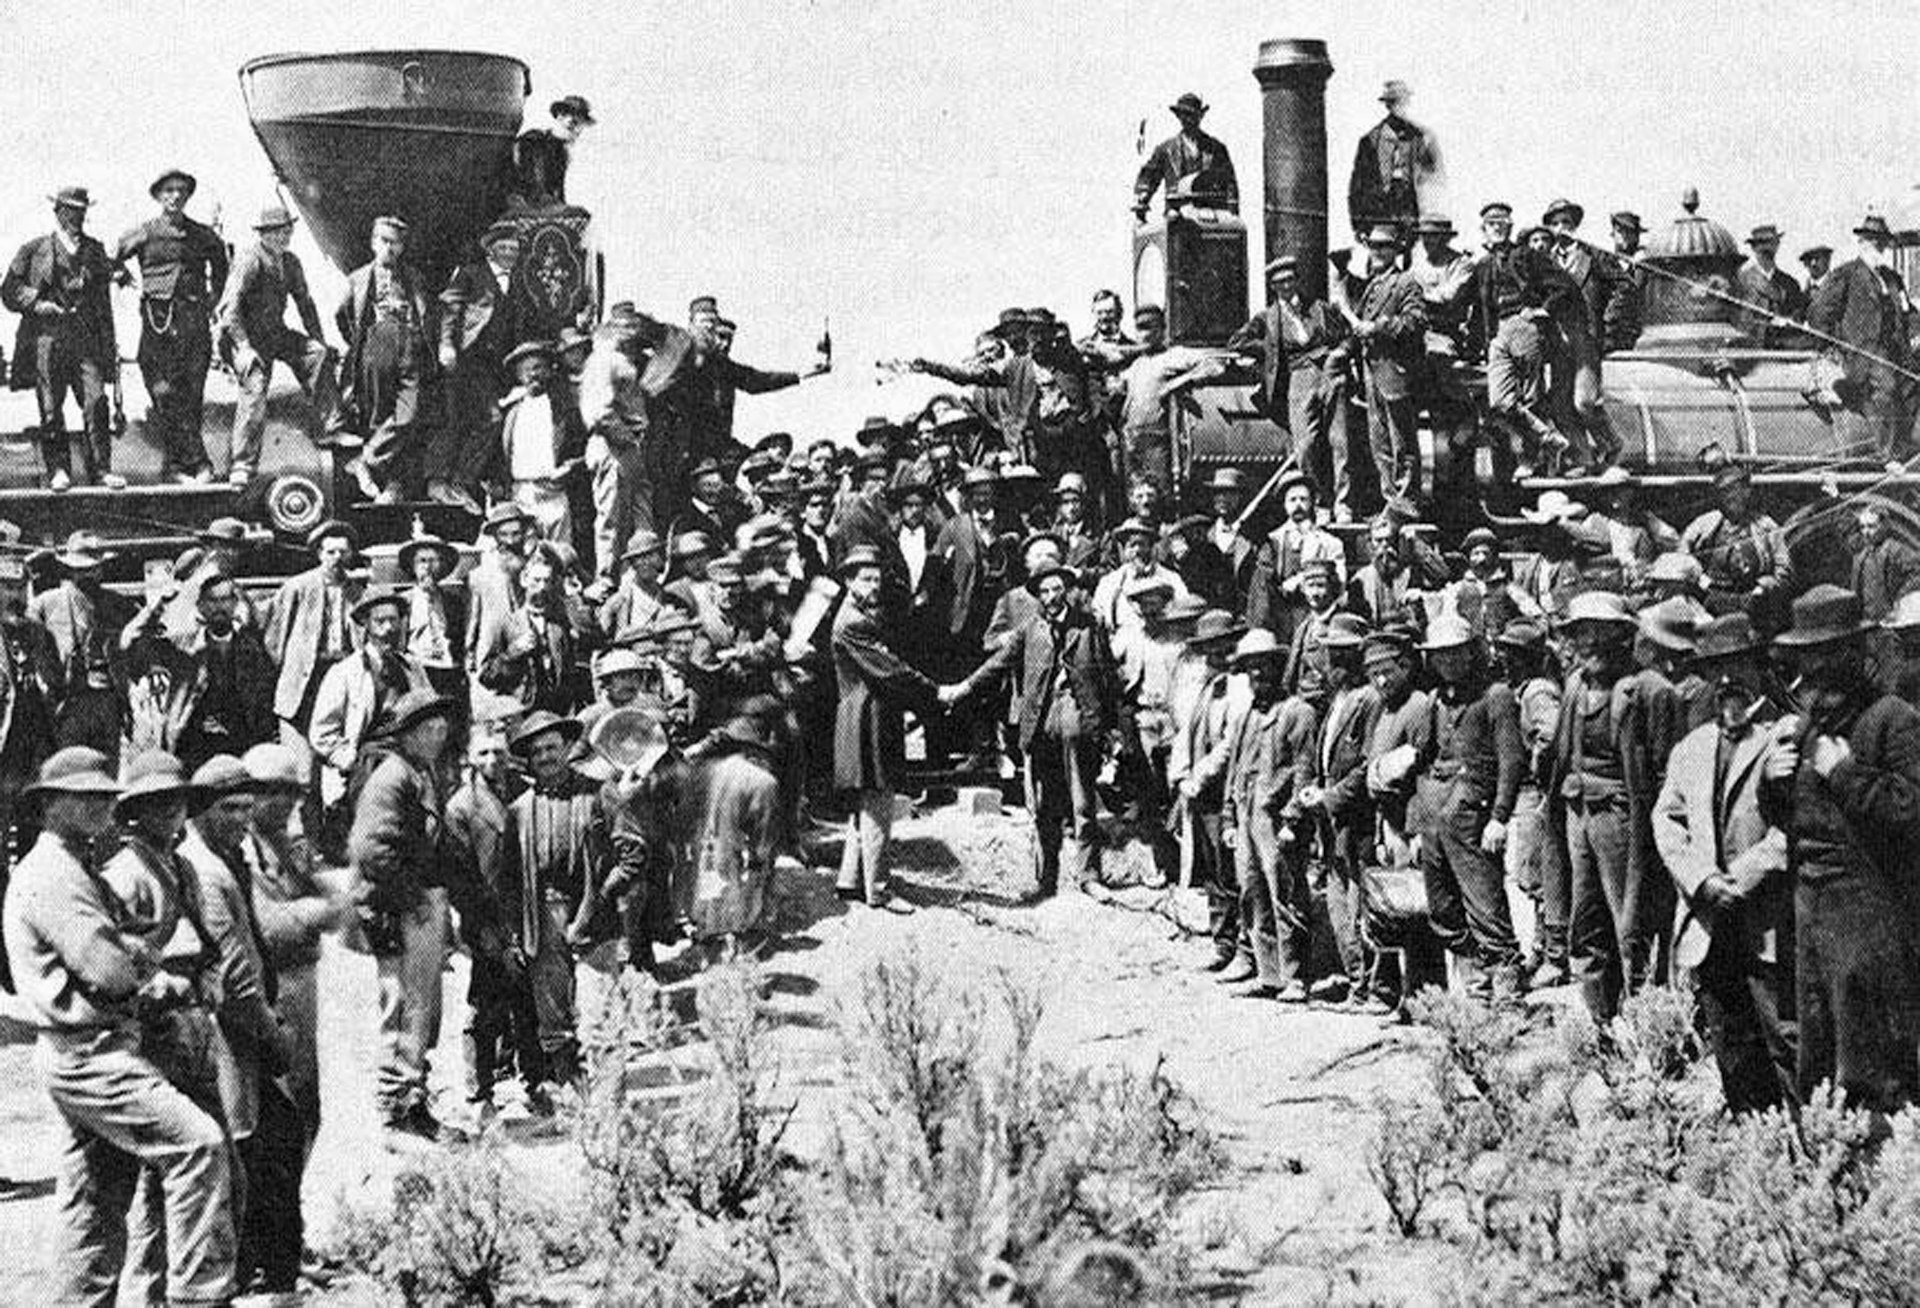 GOLDEN SPIKE  Joining the Central Pacific and Union Pacific railroad lines at Promontory Summit, Utah, 10 May 1869